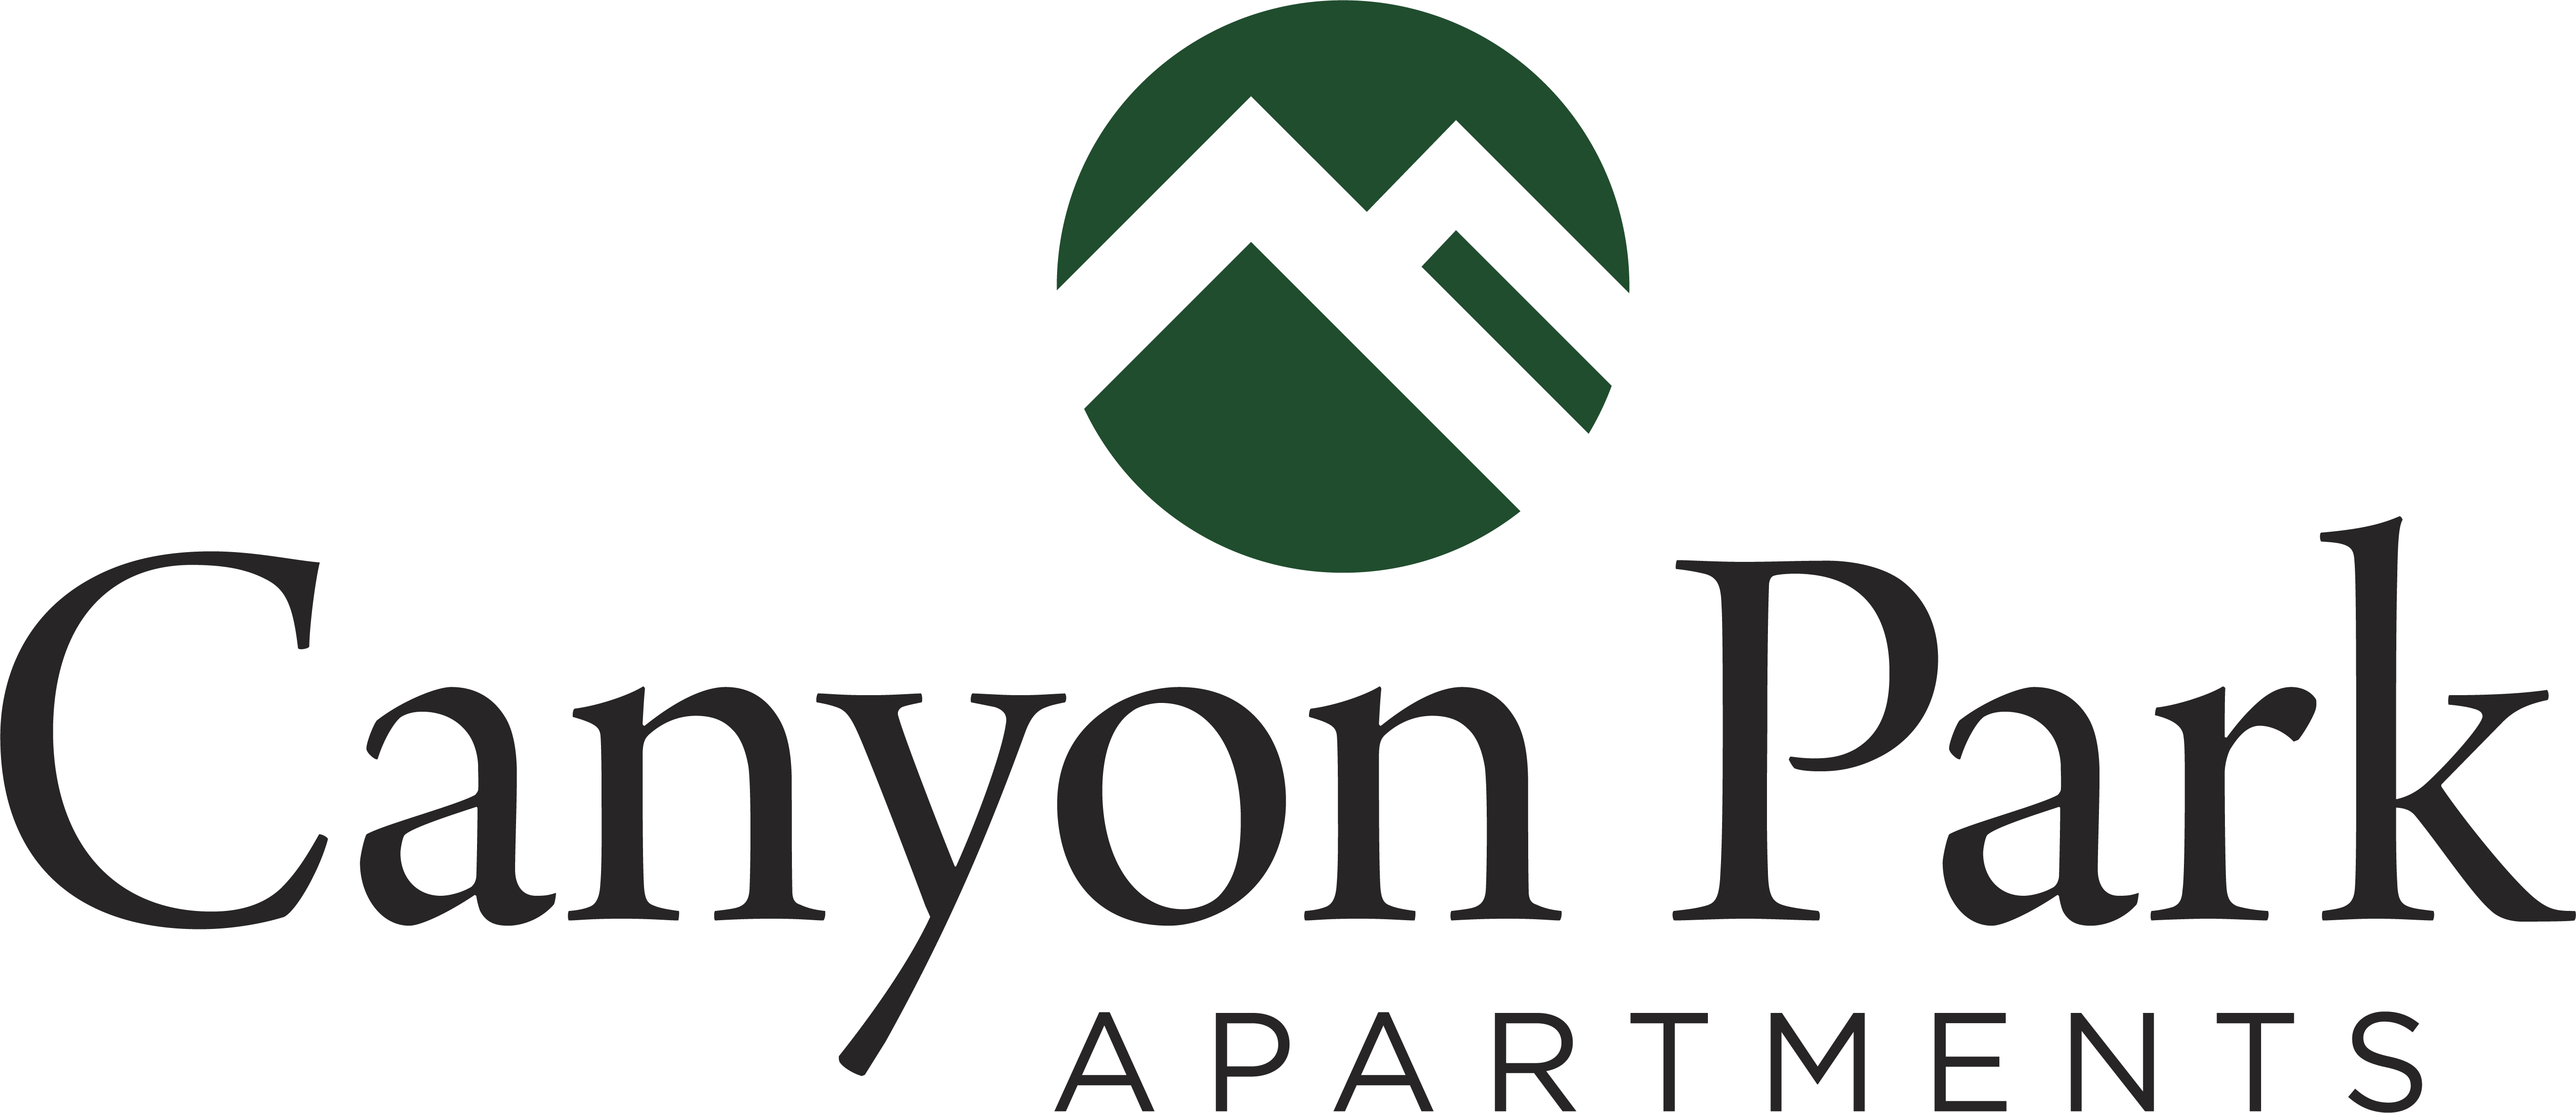 Apartments in Tallahassee | Canyon Park Apartments